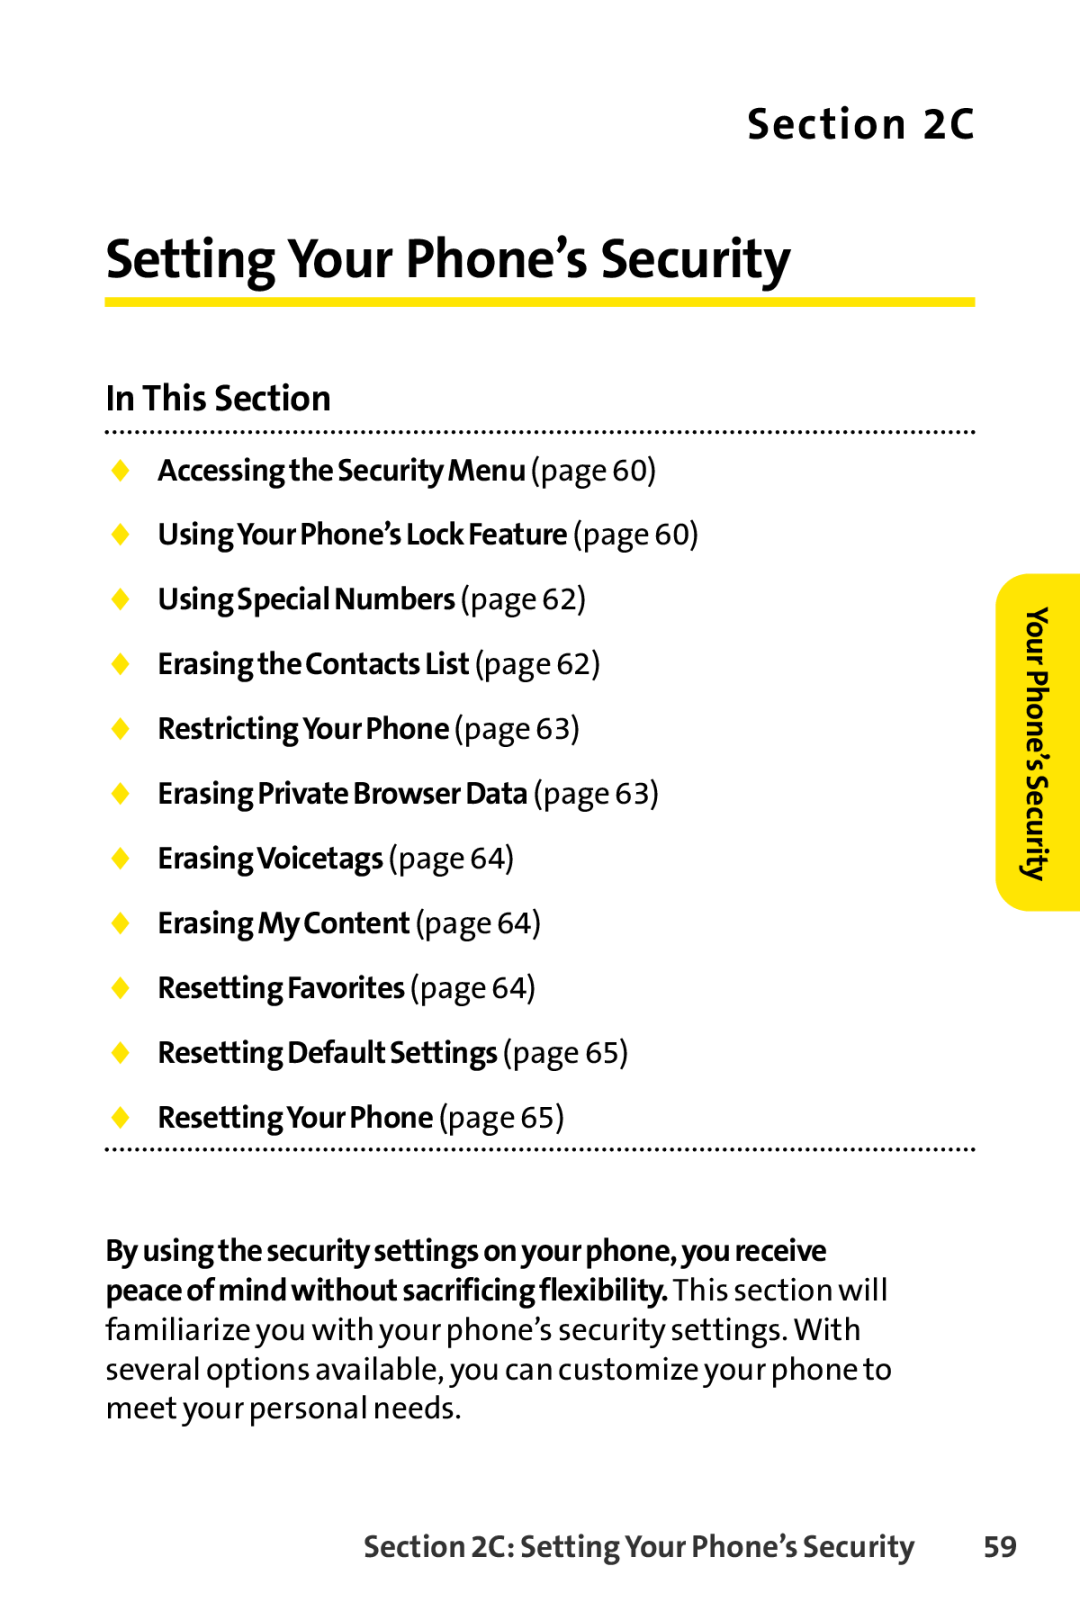 Sprint Nextel LX160 Setting Your Phone’s Security, C,  AccessingtheSecurityMenu page  UsingYourPhone’sLockFeature page 